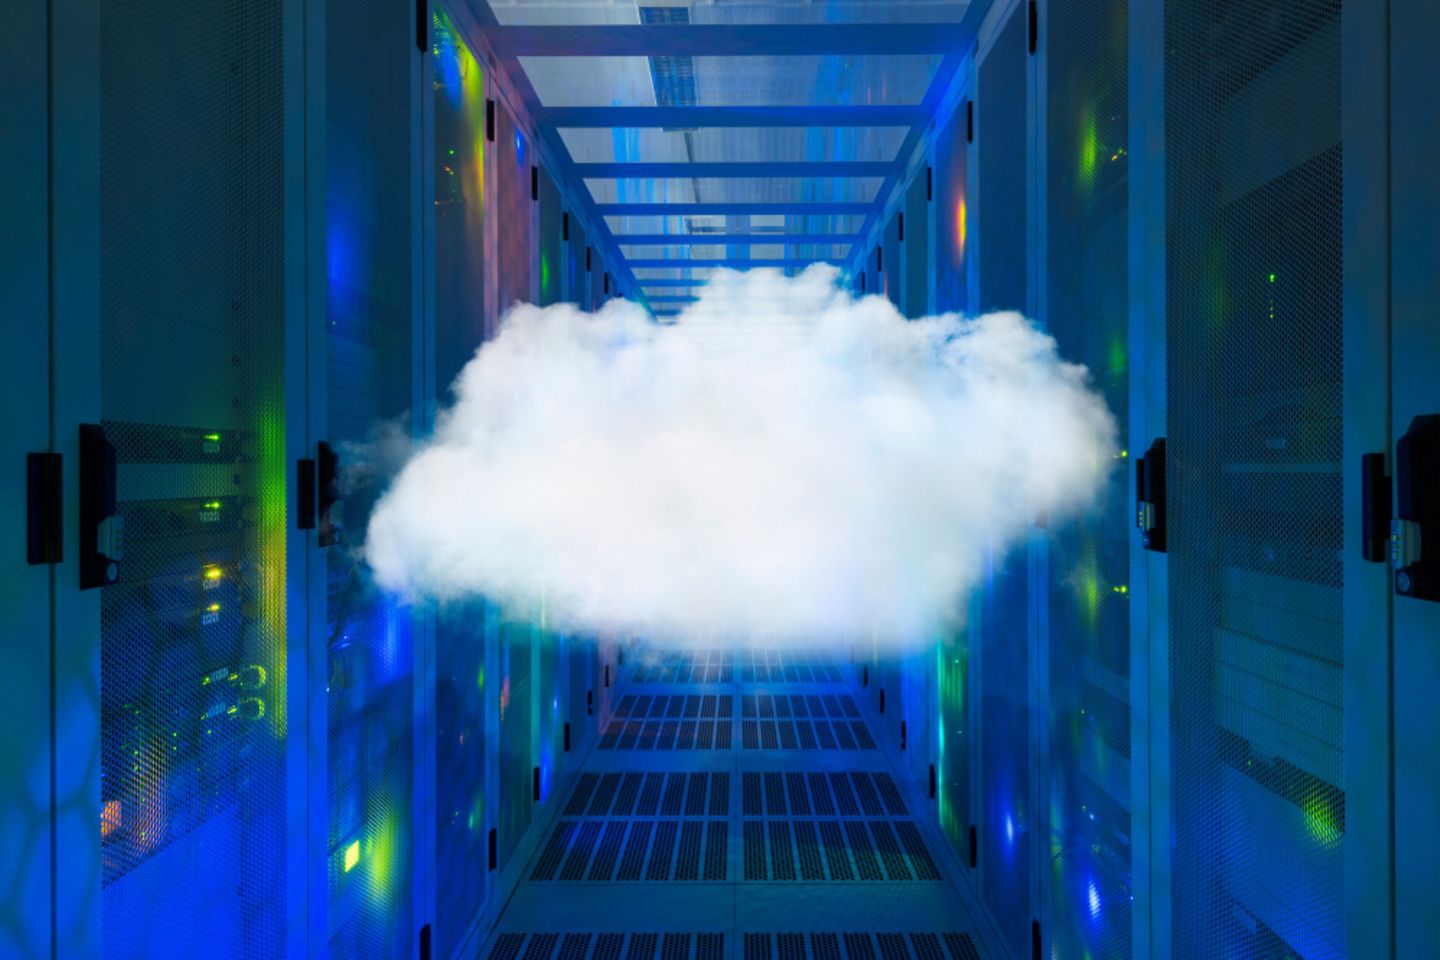 A white cloud floats in a server room